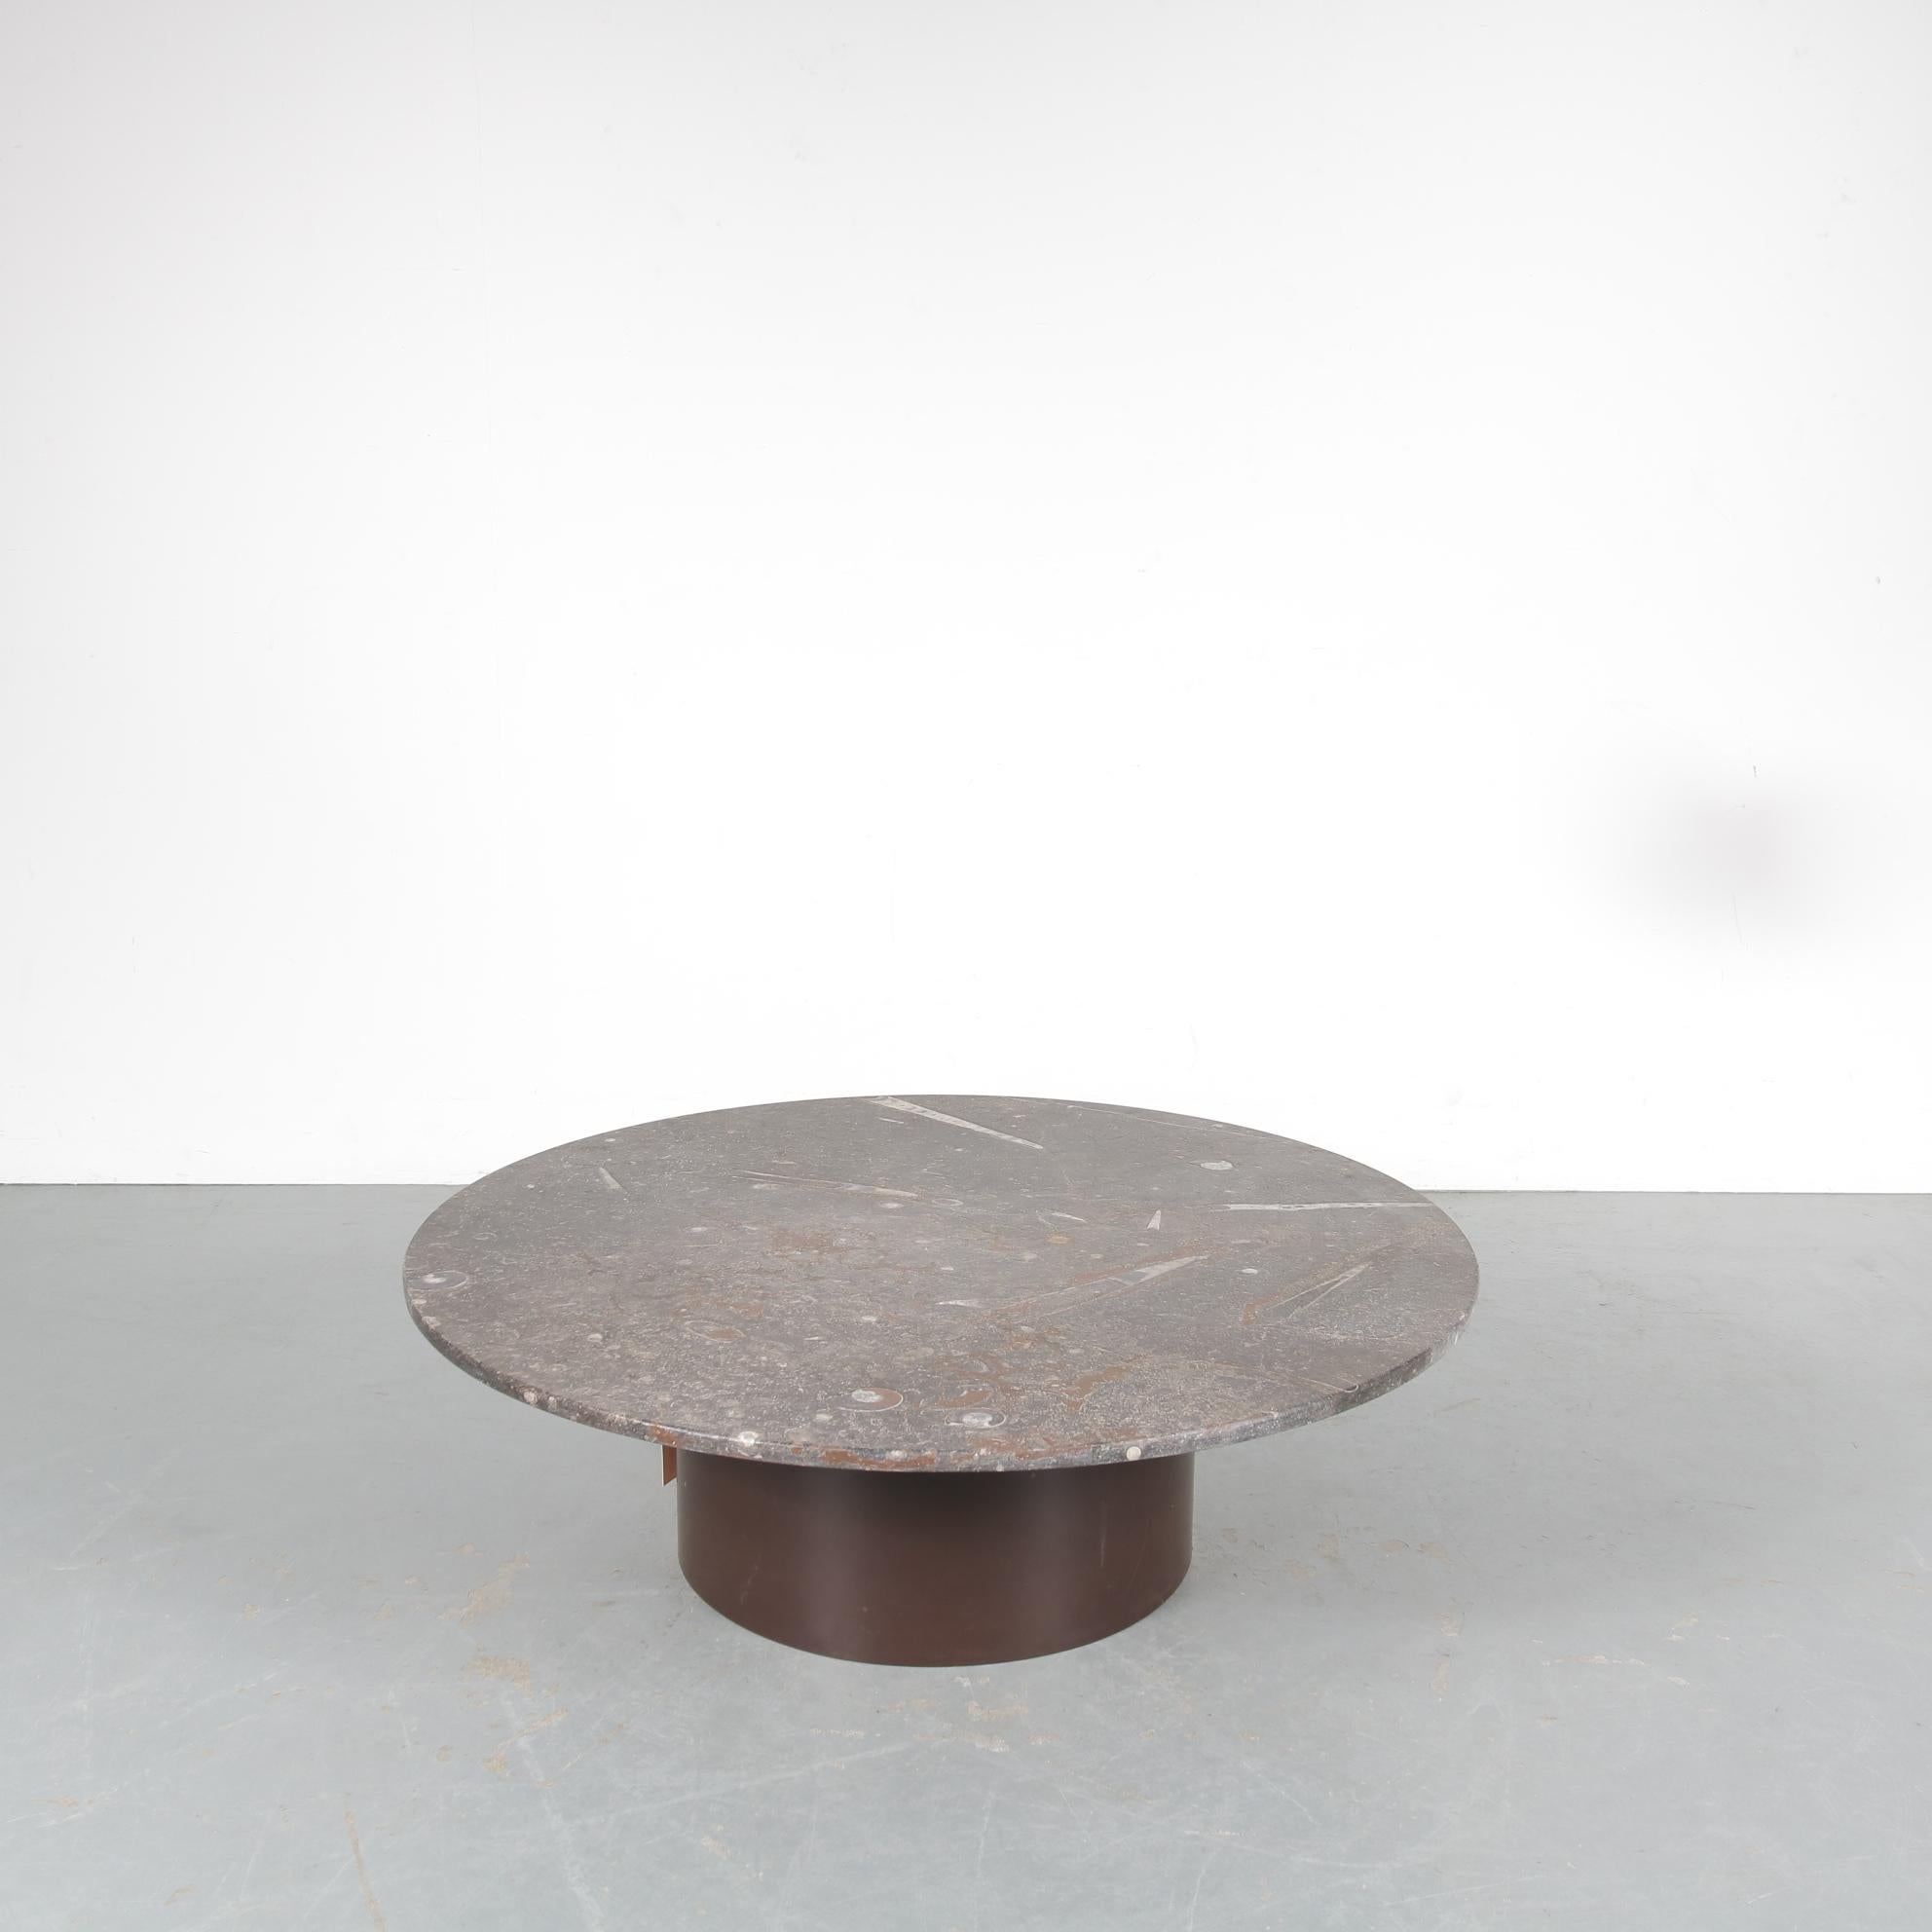 An eye-catching coffee table, designed by Heinz Lilienthal and manufactured in Germany around 1970.

The unique feature of this table is the large round stone top that has ammonite / fossil inlays. This creates a unique appearance that keeps the